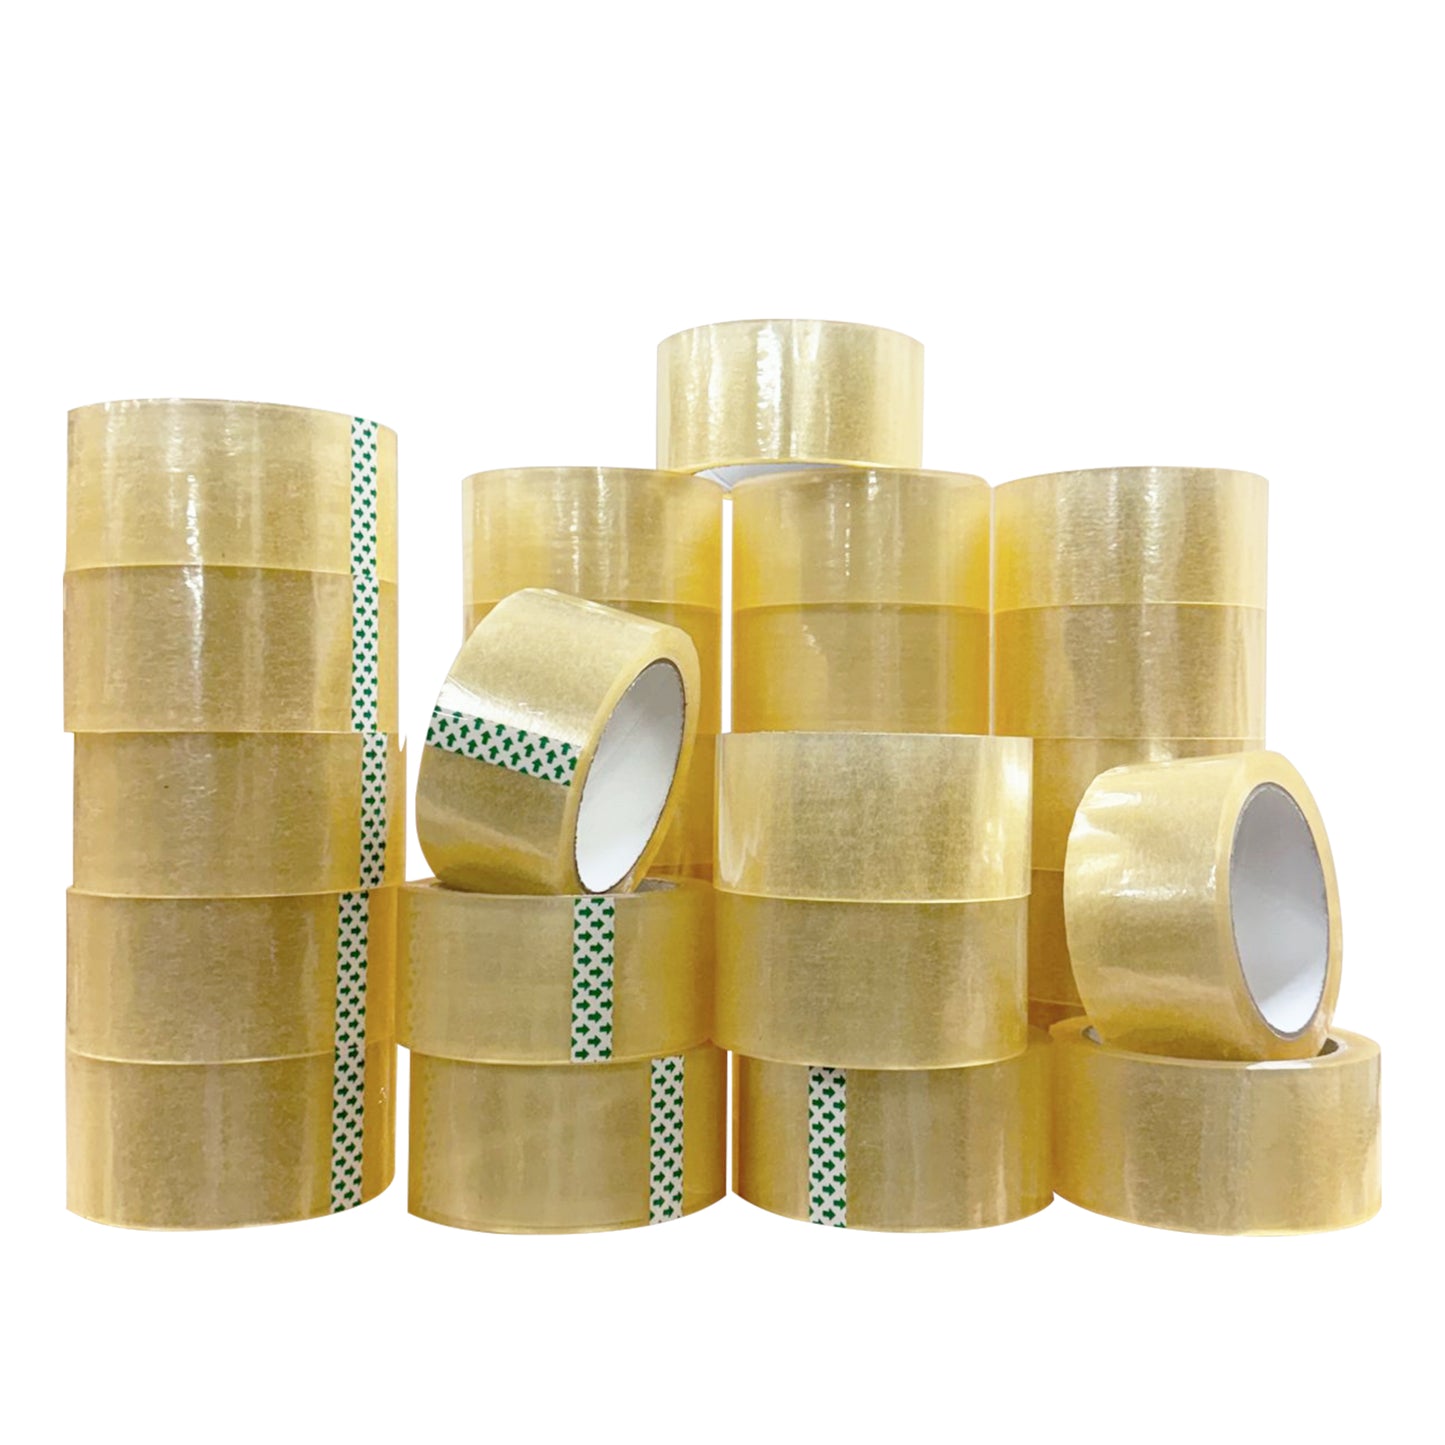 Clear Packaging Tape 48mm x 66m (45 Micron)